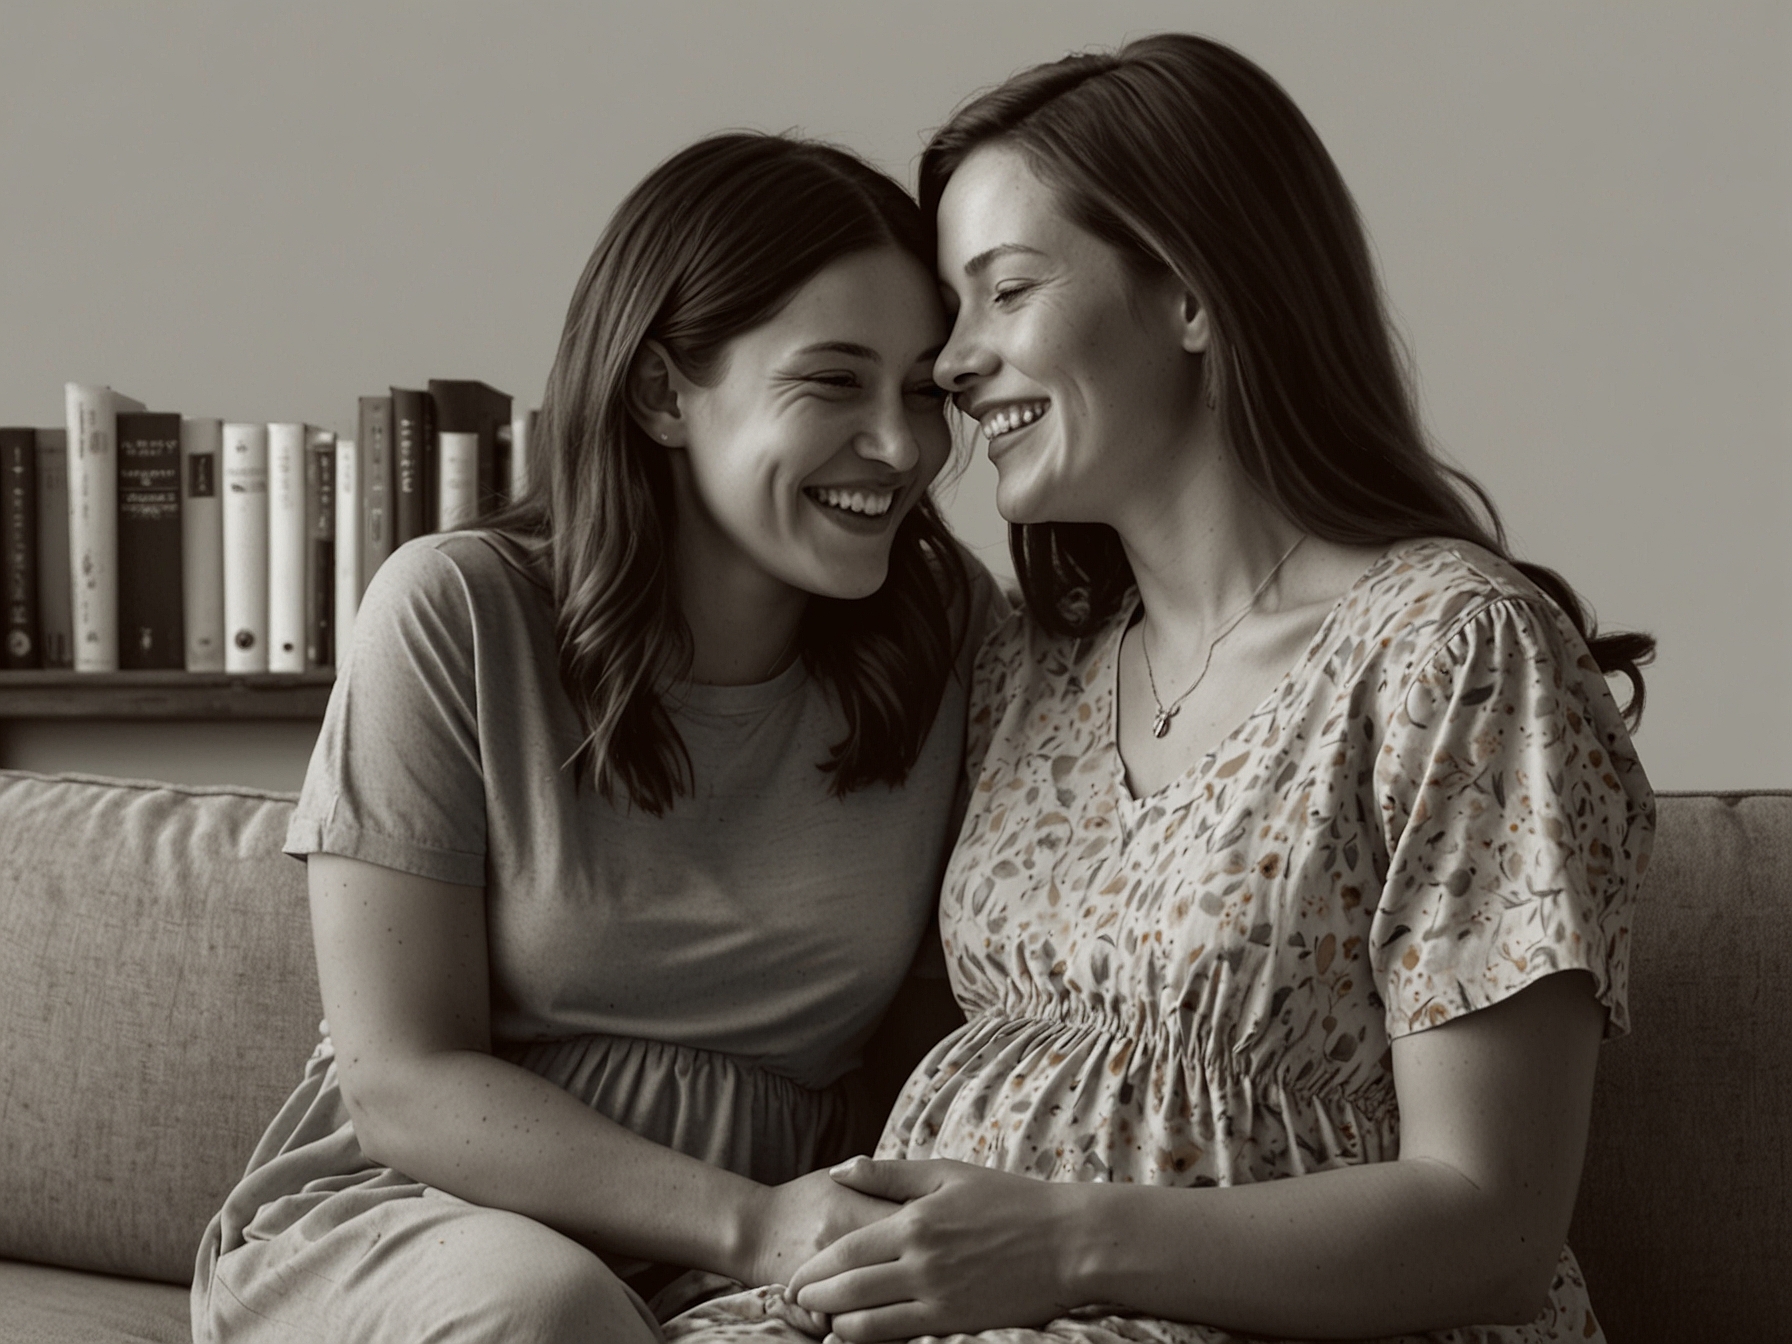 Sarah's eldest daughter, Emily, sits beside her mother, gently touching the baby bump and smiling cheerfully, symbolizing her excitement about becoming a big sister.